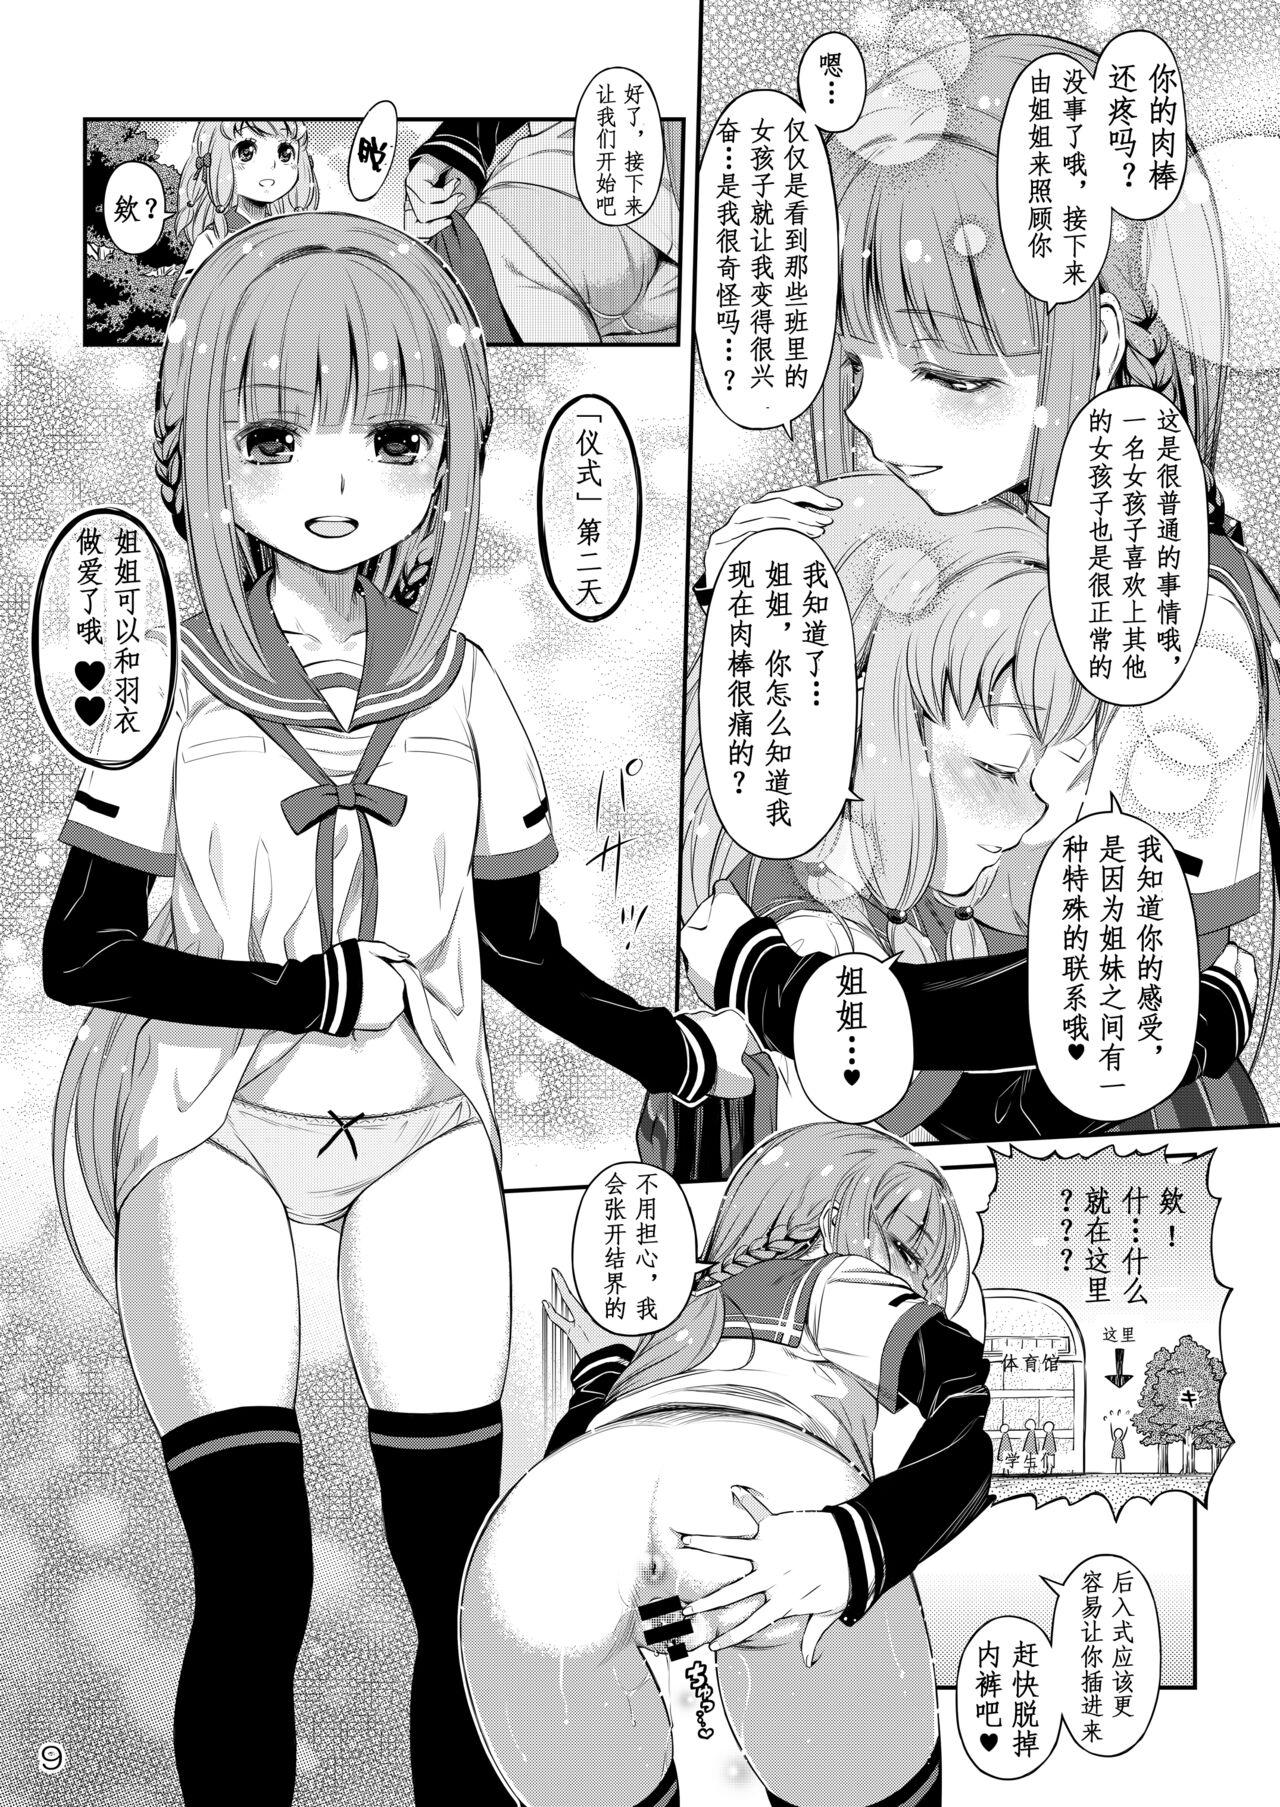 Trimmed Dear My Little Sister - Puella magi madoka magica side story magia record Style - Page 9